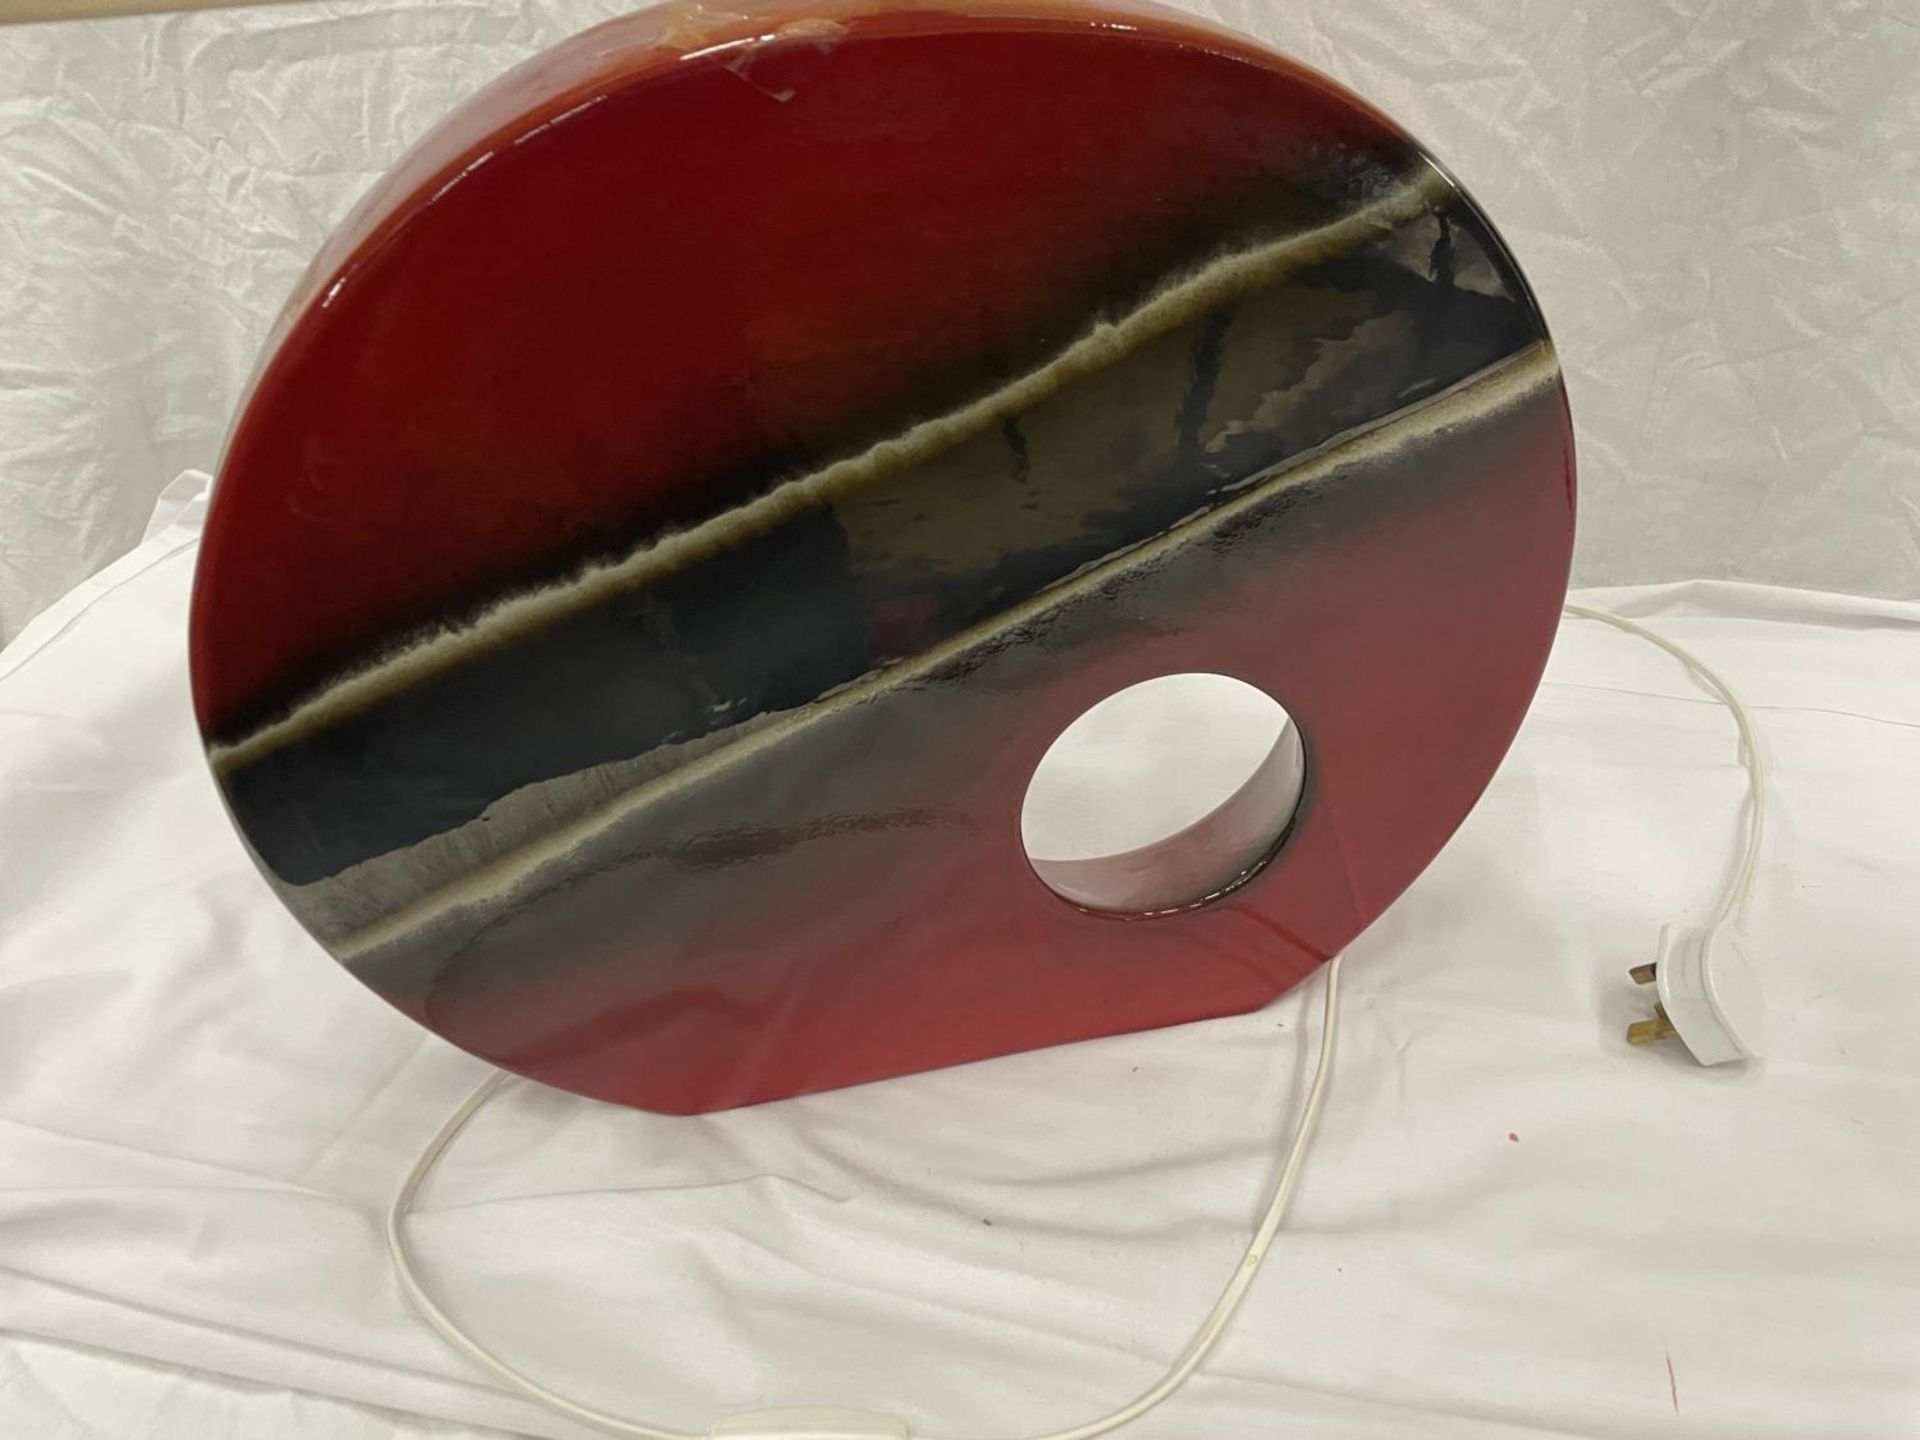 A VERY LARGE ART SCULPTURE ROUND RED LAMP WITH SHADE HEIGHT 40CM, WIDTH 47CM - Image 6 of 6